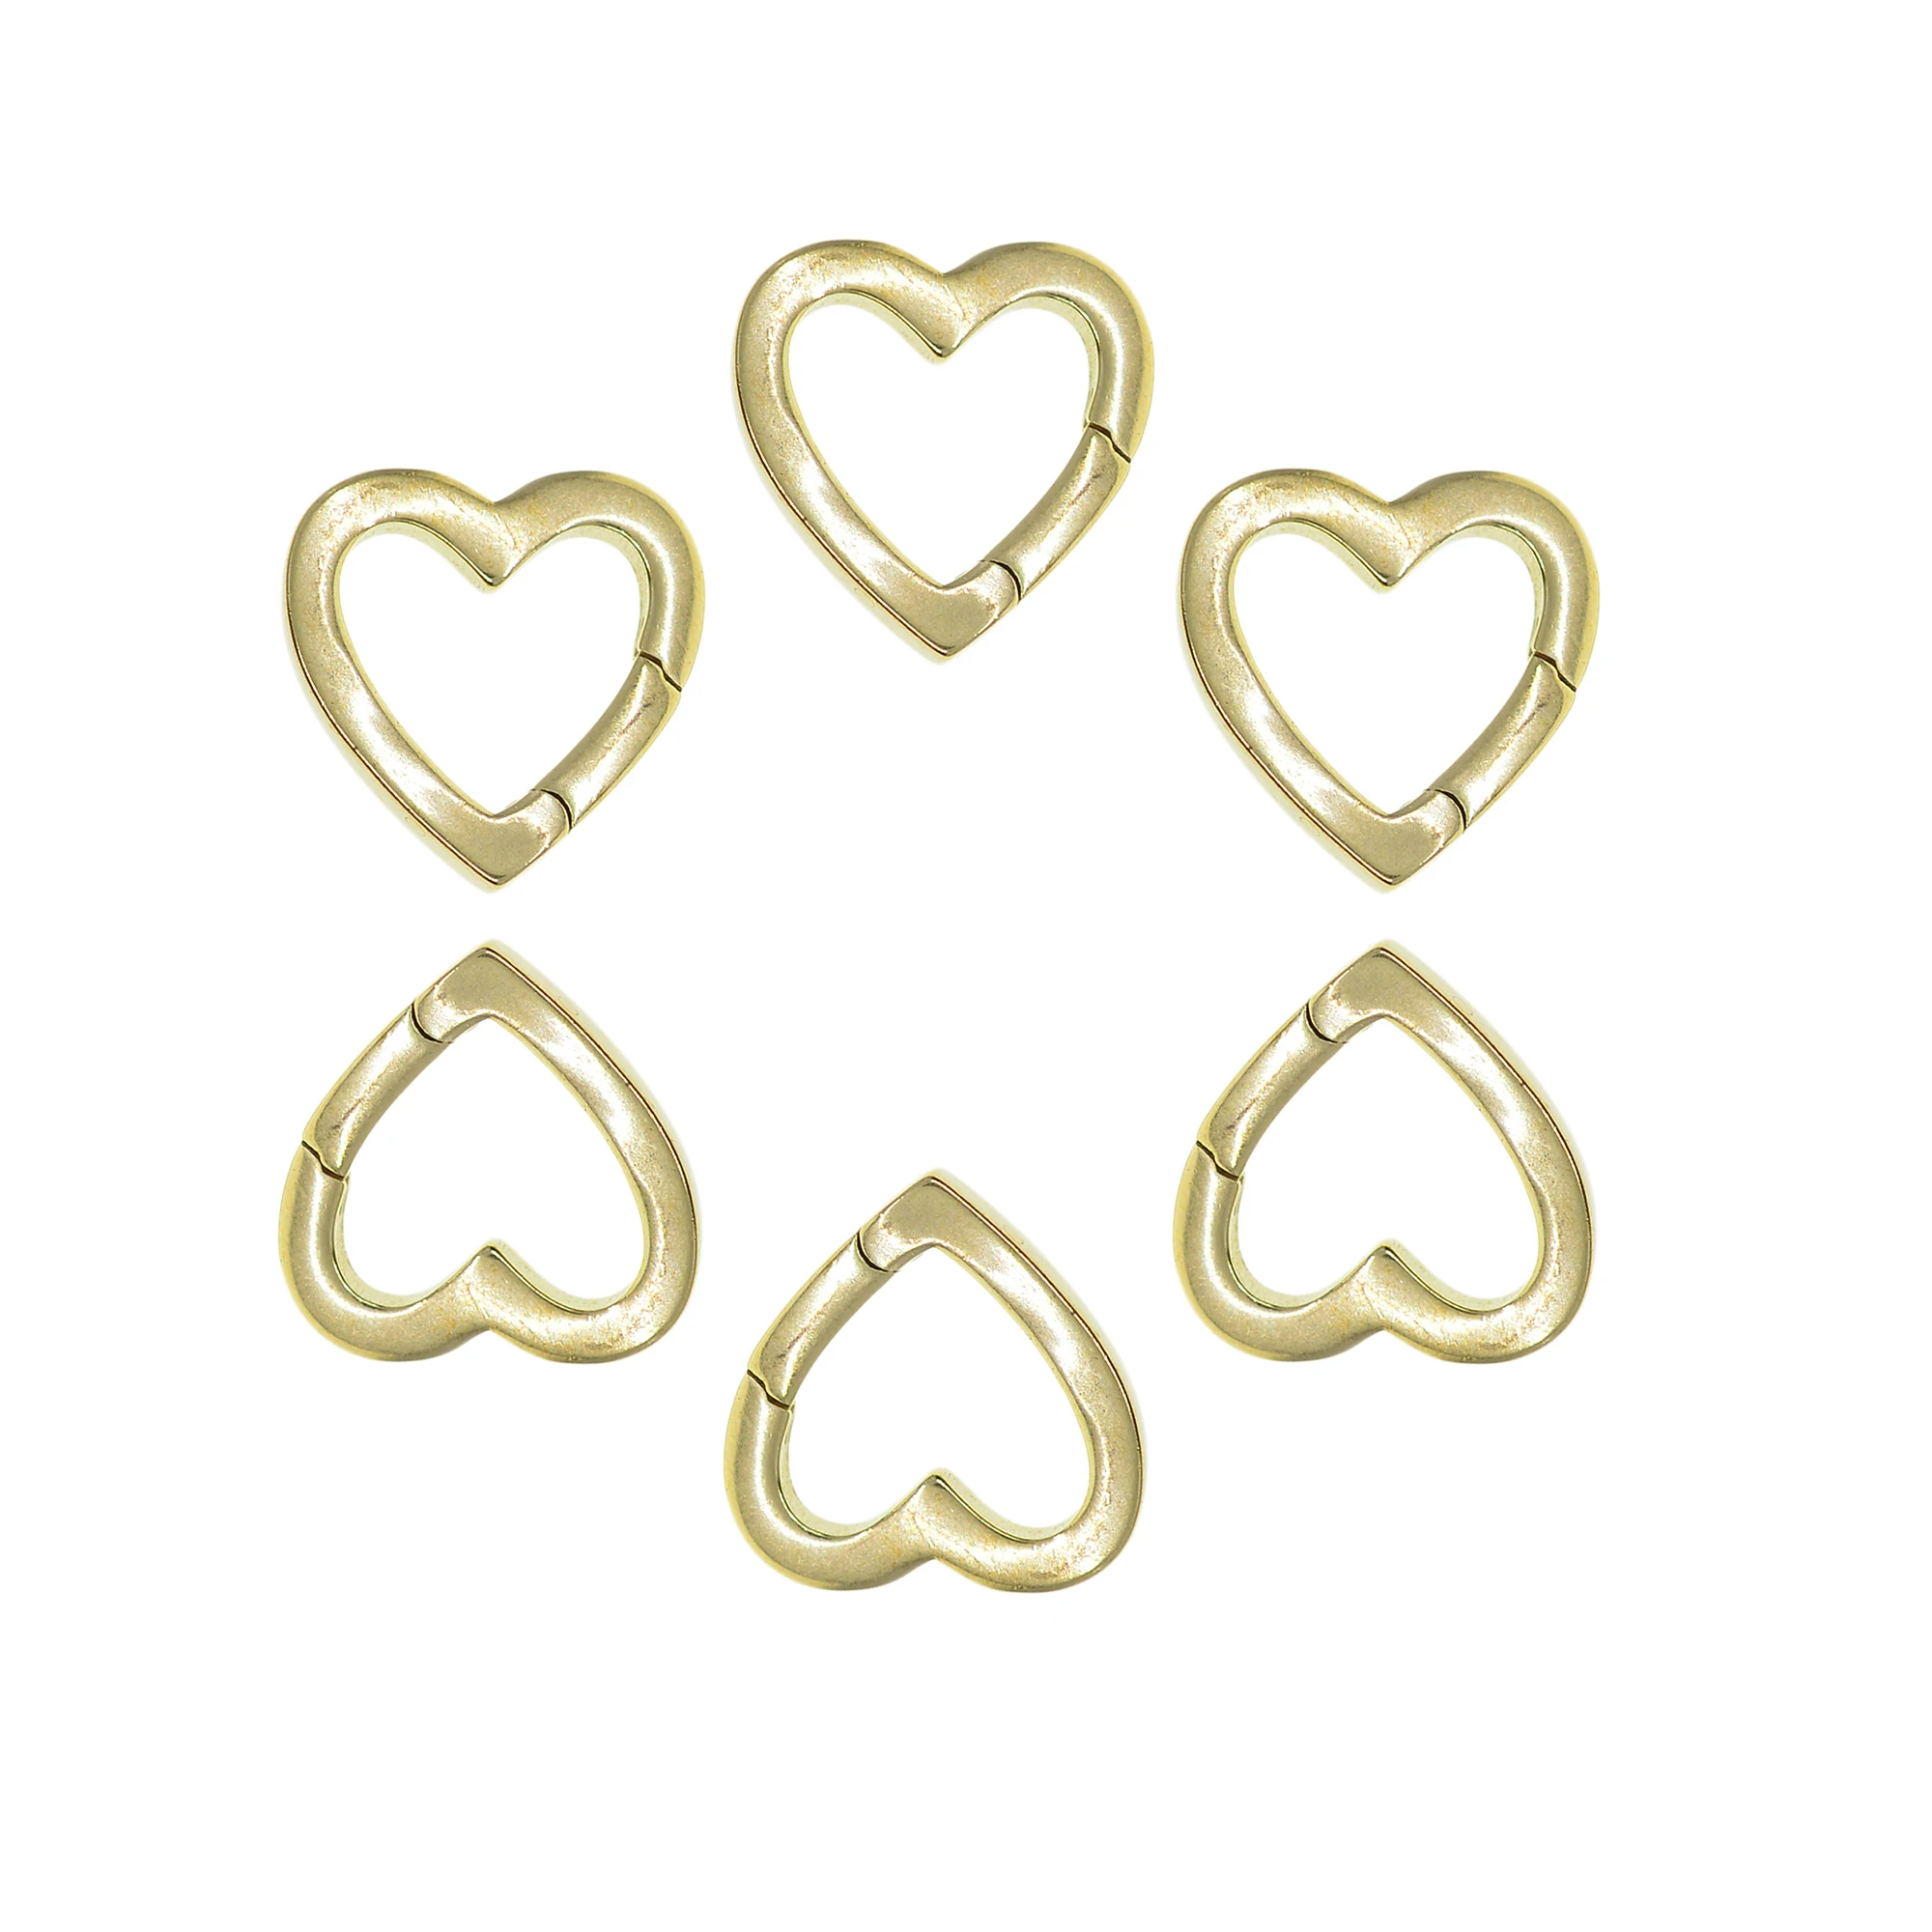 

6pcs Korea small mini 16mm 0.6inch Fine Solid Brass Square heart snap spring hook clasp jewelry DIY Accessory